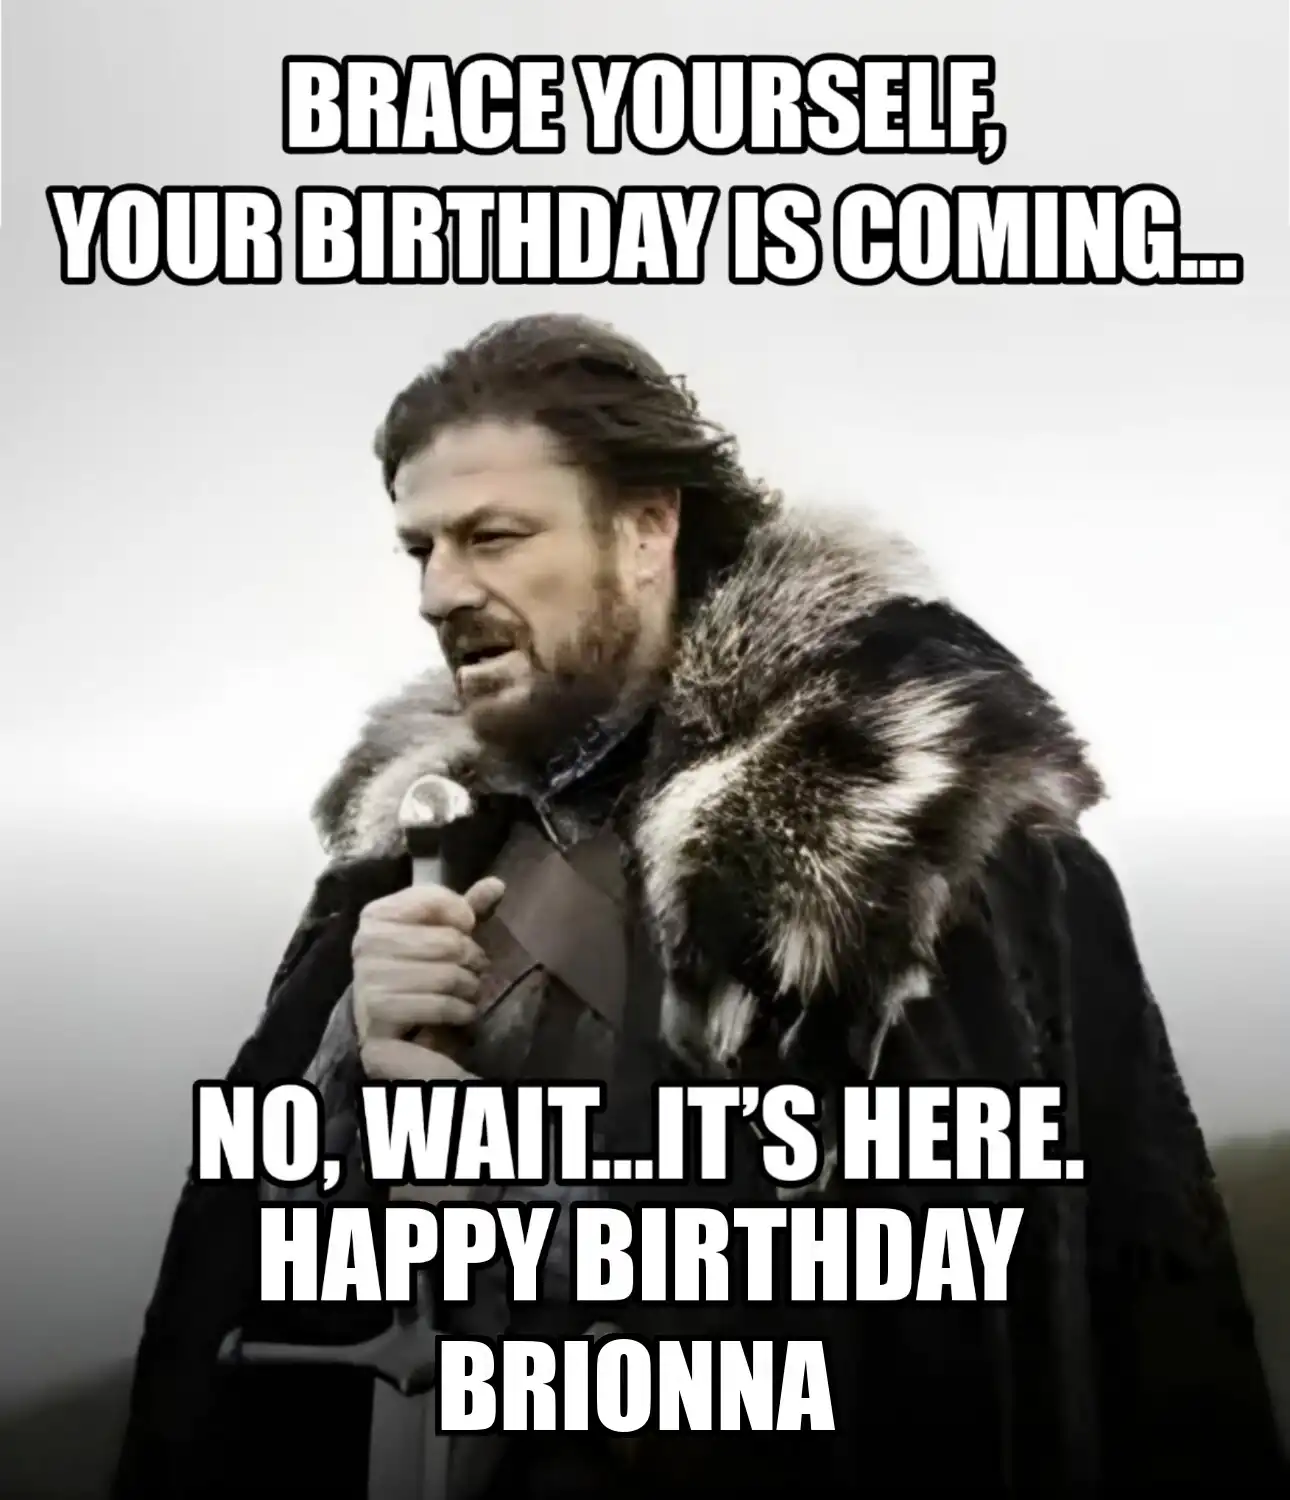 Happy Birthday Brionna Brace Yourself Your Birthday Is Coming Meme